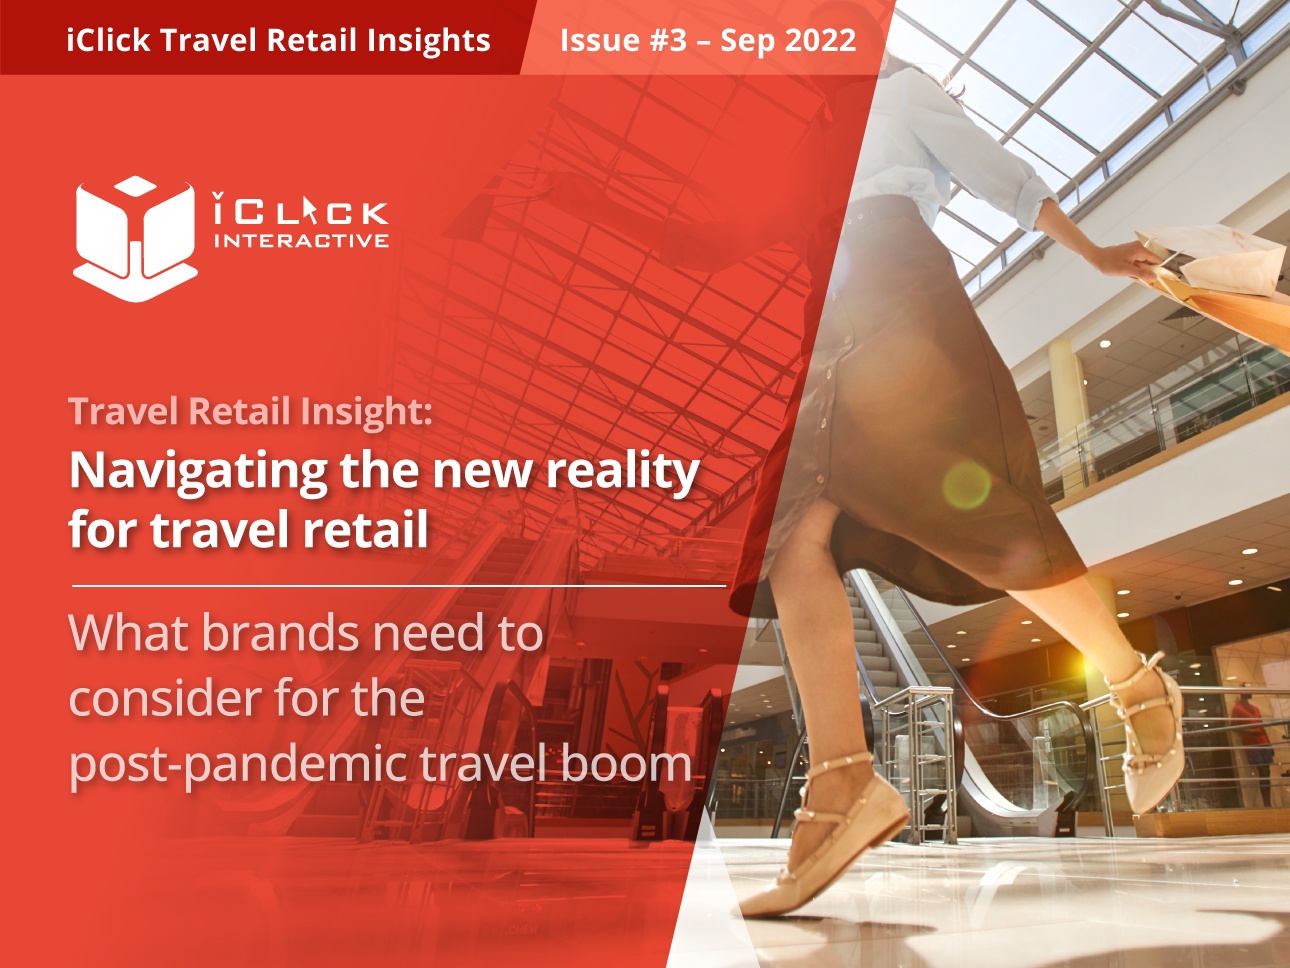 iClick Travel Retail Insights – Issue #3 Navigating the New Reality for Travel Retail